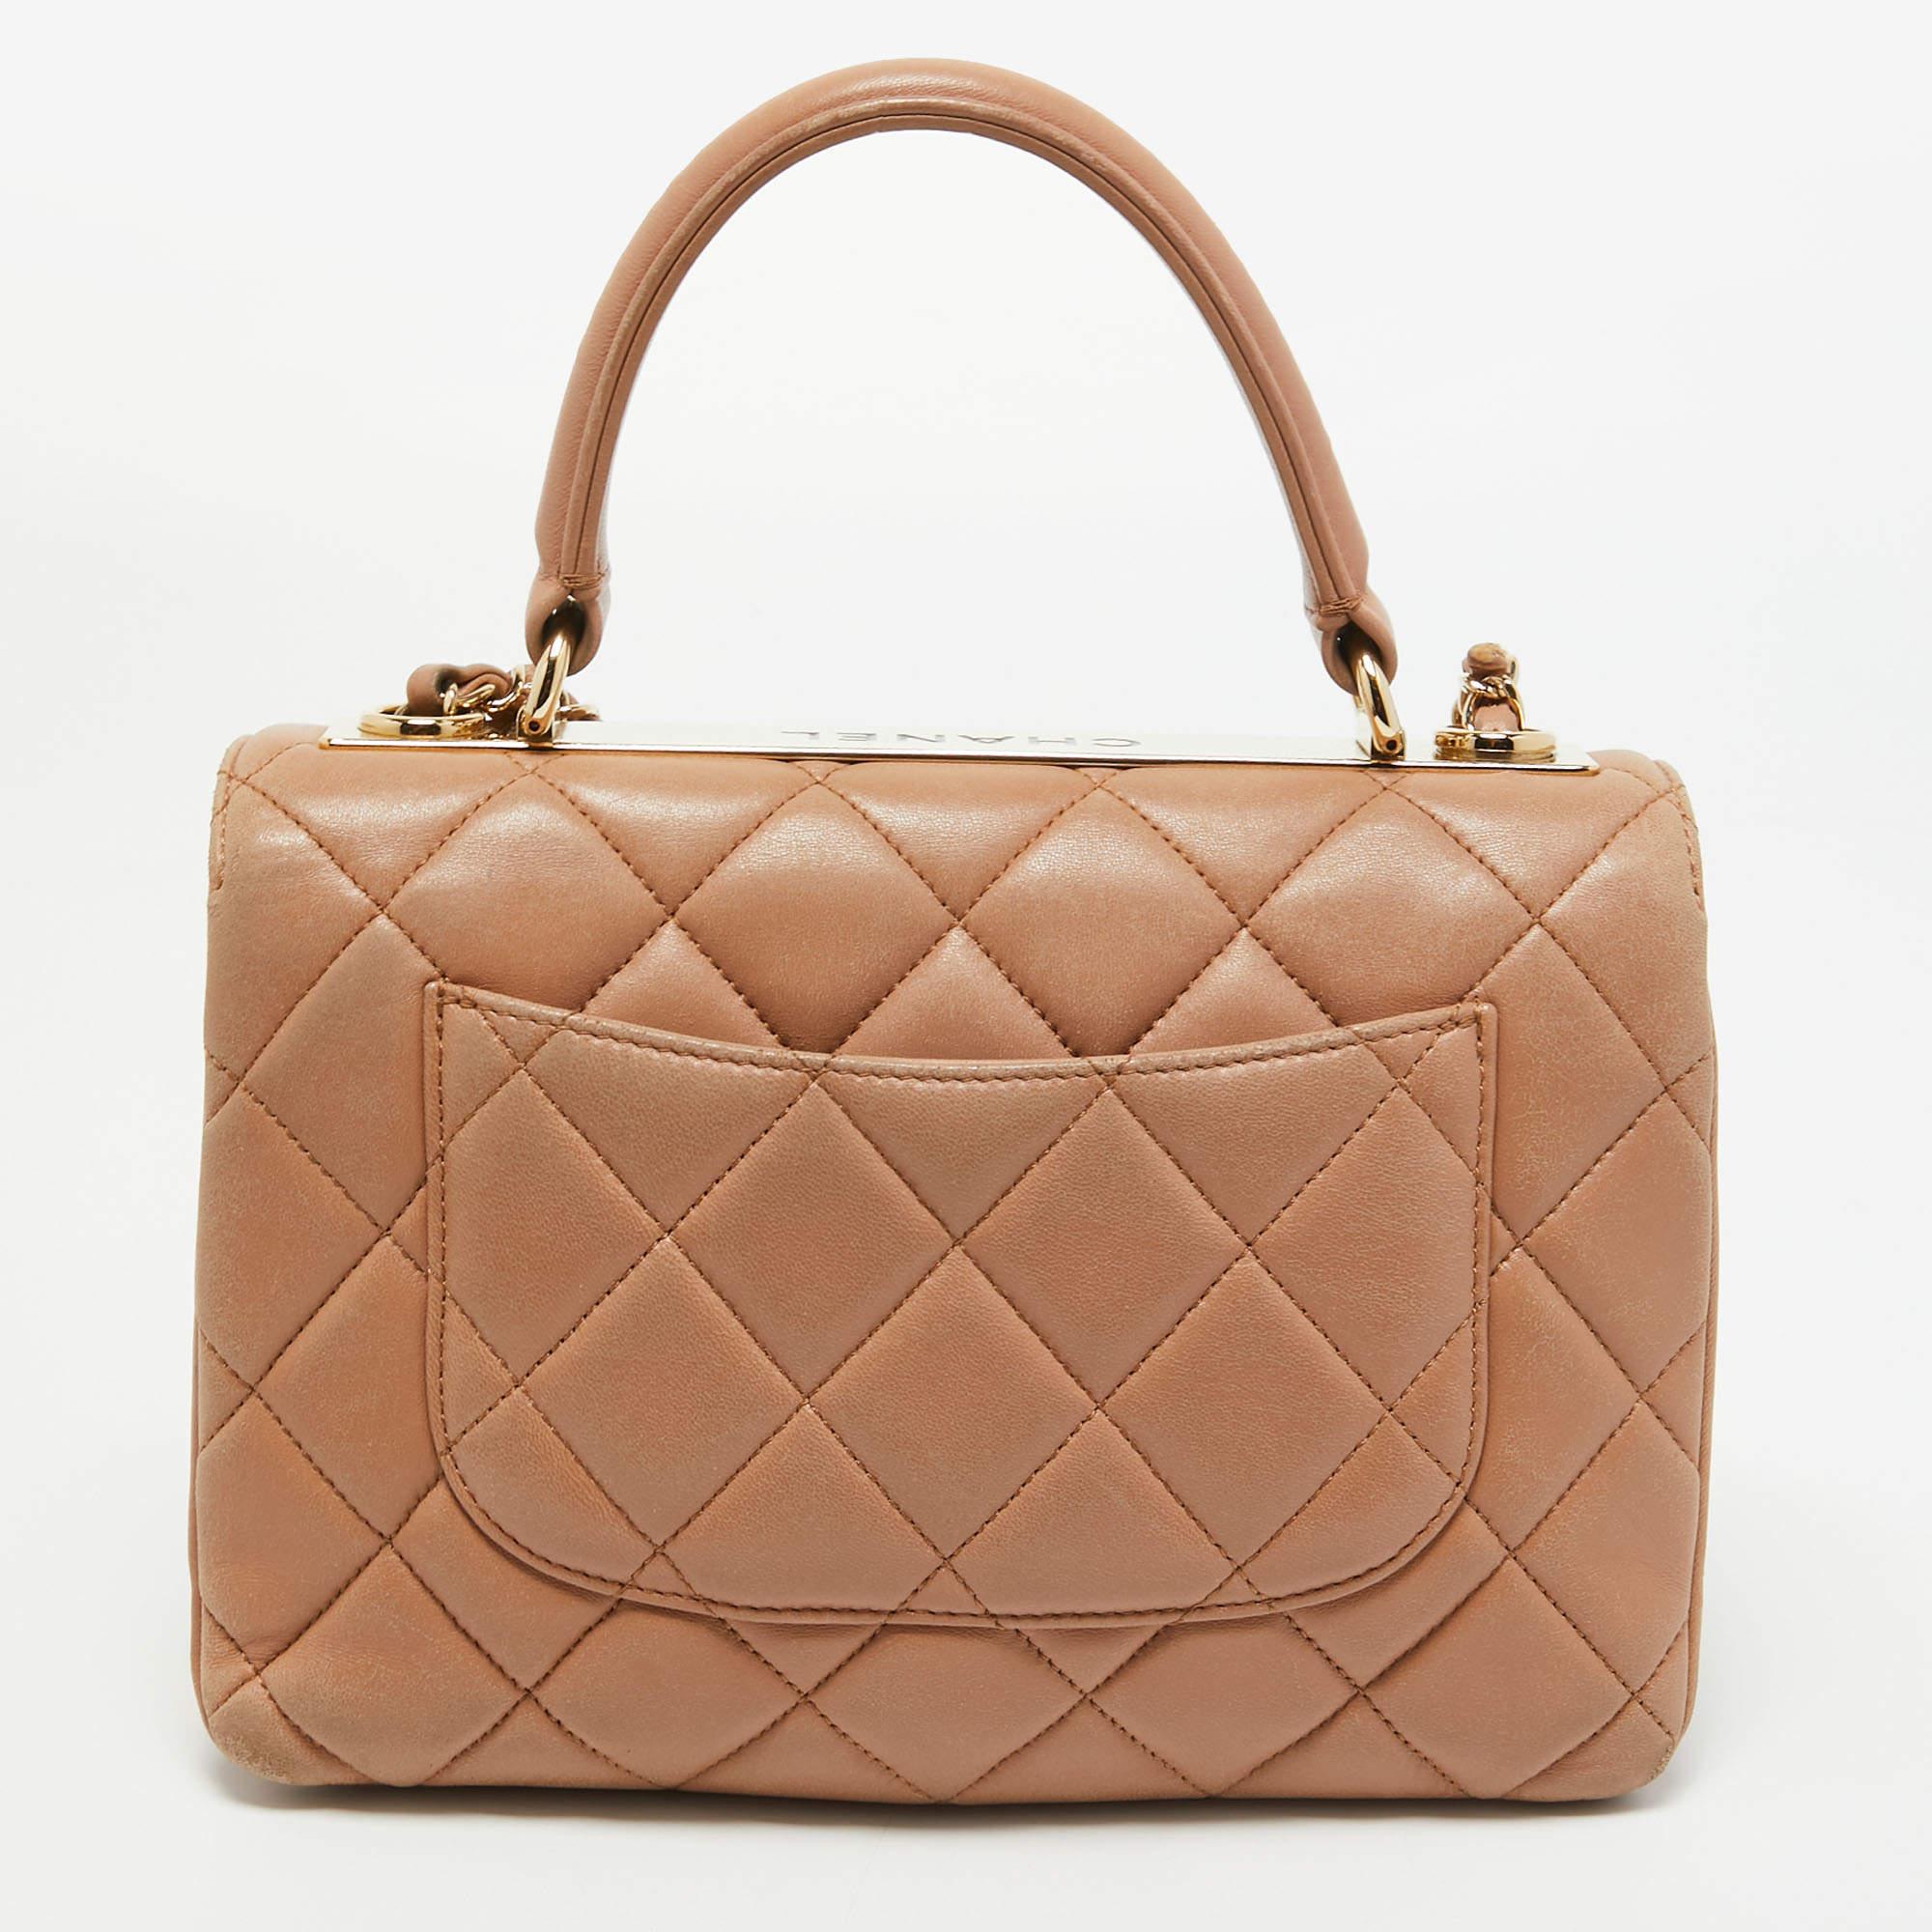 This Trendy CC Flap bag from the House of Chanel will surely add sparks of luxury to your wardrobe. Embellished with the iconic CC lock on the front, this bag is crafted from beige quilted leather into a chic silhouette. It is added with a chain